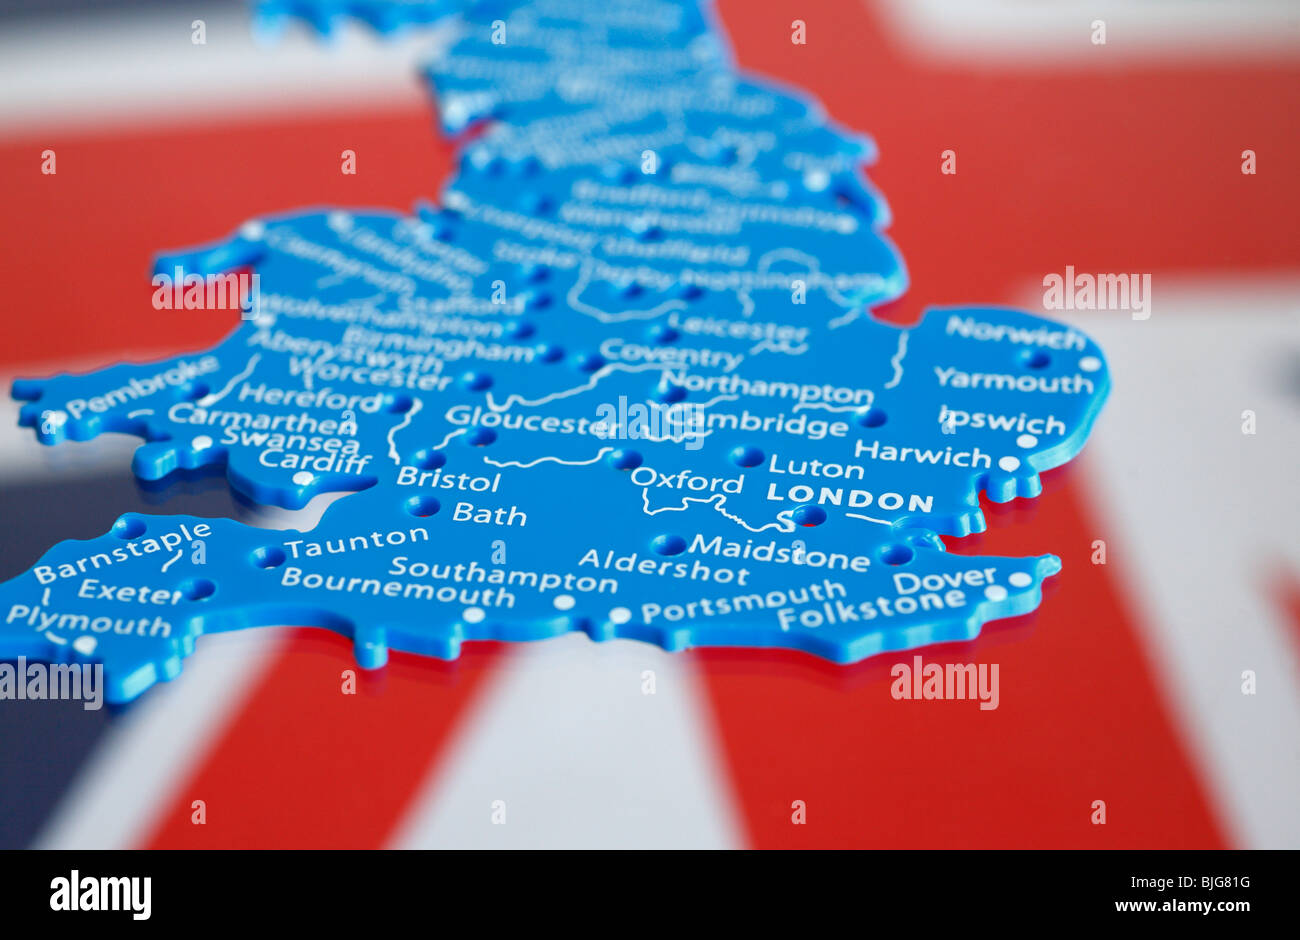 Plastic stencil of the UK set against the Union Jack flag. Stock Photo